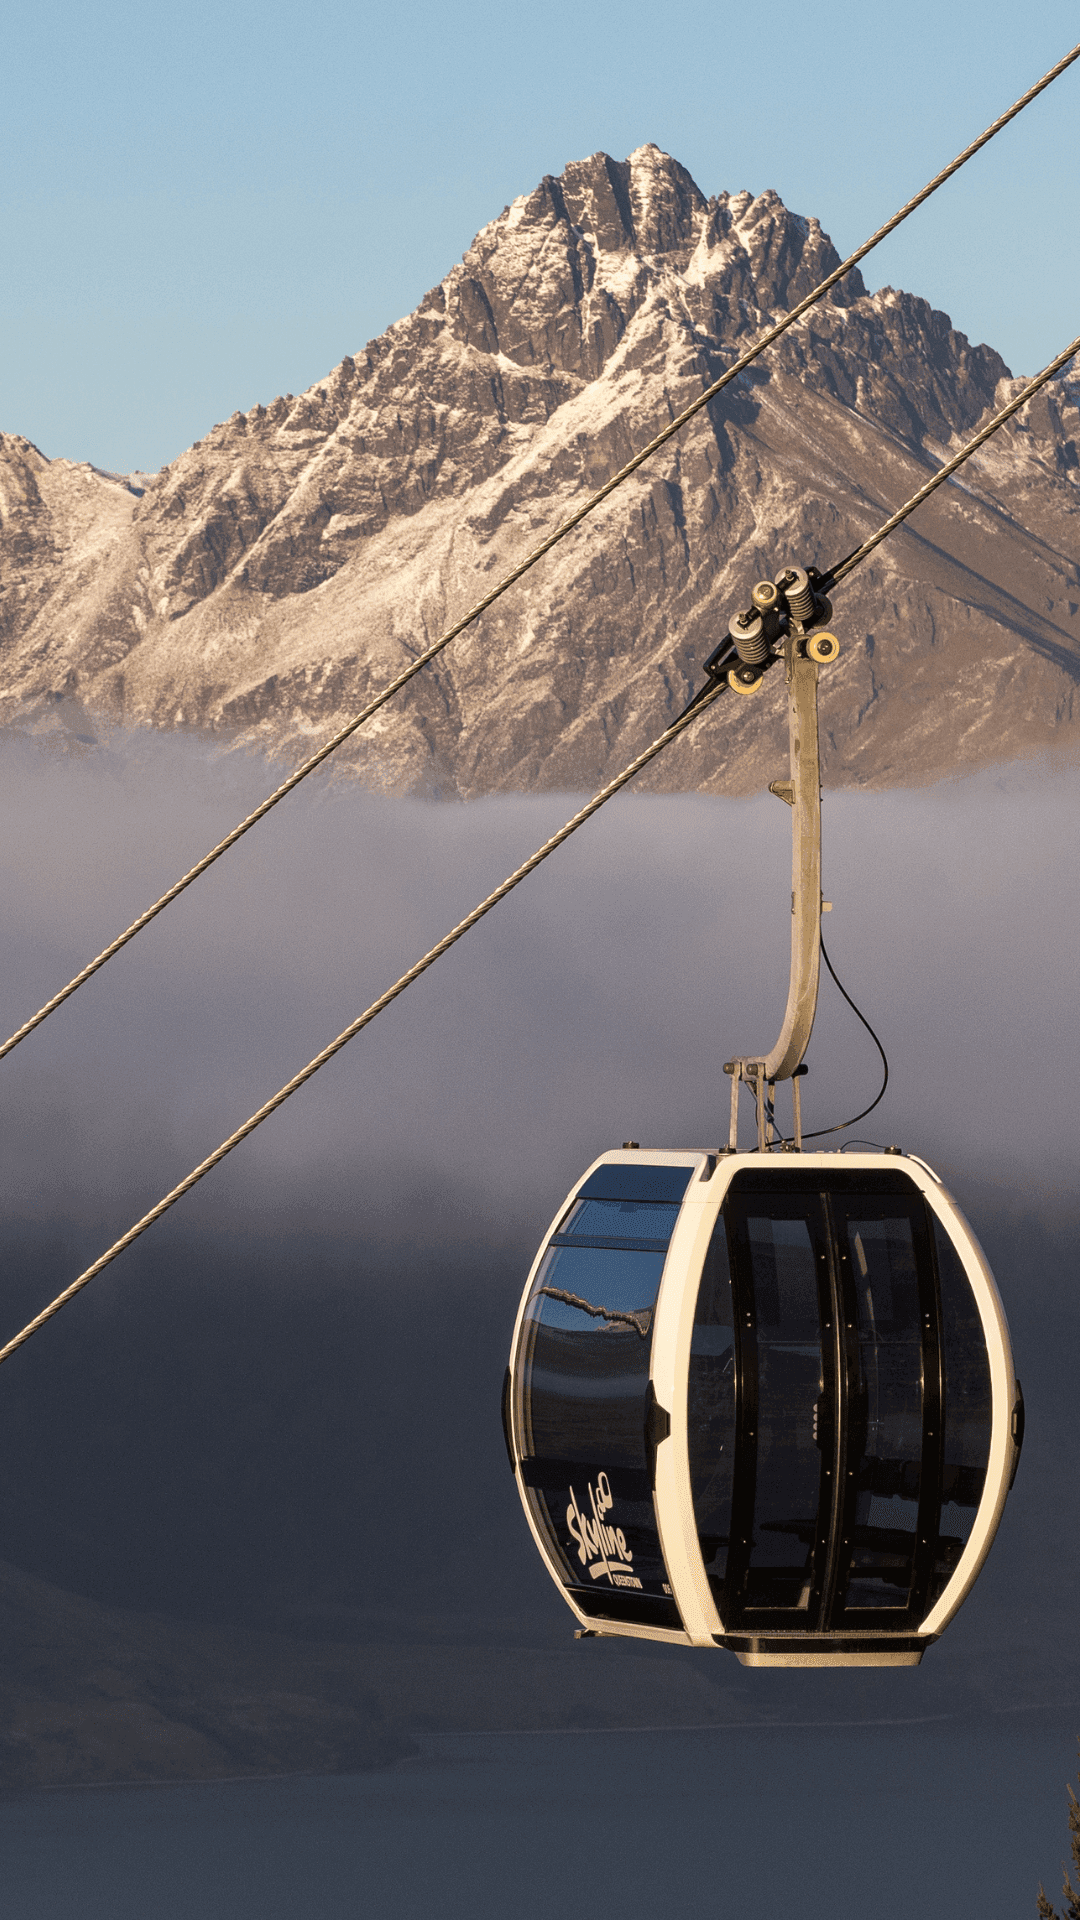 Image of the Gondola rises from the mist with mountains in the background